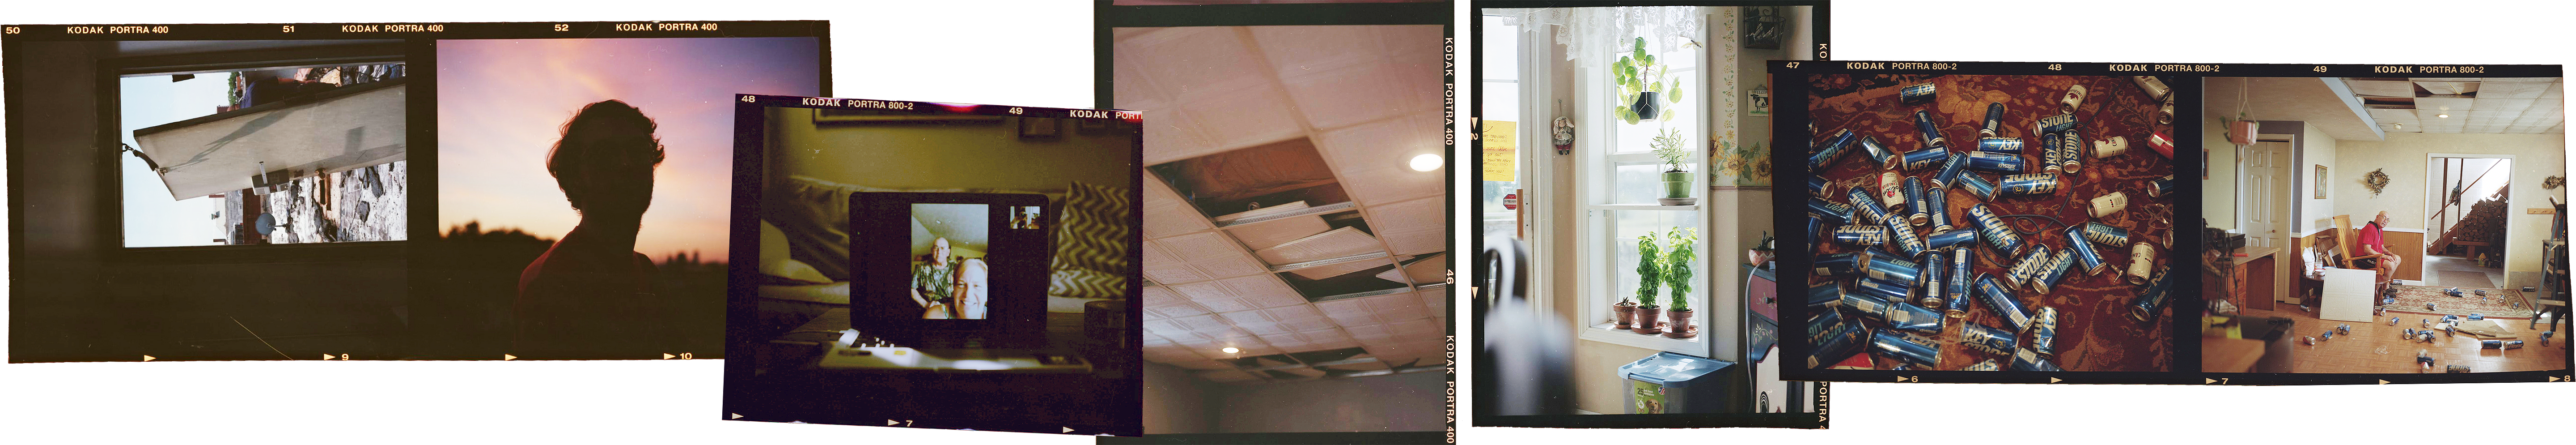 7 images in a line. Each image still has the film border around it, showing that it was pulled from a contact sheet. From left to right, the images are as follows: 1) a dark border around a doorway looking out onto a roof. There is mess on the roof and the door is detached. 2) a silhouette of Bridget’s partner against a sunset, presumably on the same roof. 3) a photograph of a computer screen showing Bridget facetiming with her mom and stepdad. Her stepdad is showing off his newly shaved head in preparation for chemotherapy. 4) a tiled ceiling with pieces pulled away, revealing hidden beer cans in corners of the ceiling. 5) a window with various potted plants in it, 2 basil plants, 1 rosemary, and a hanging pilea peperomioides. 6) a floor with beer cans scattered across the rug. They are mostly keystone light, with a few molsen and other cans mixed in. 7) a wide angle enironmental portrait of Bridget’s stepdad sitting on a bench in her mom’s basement among the beer cans scattered across the floor and tiles removed from the ceiling. He is hooked up to a portable oxygen machine & he is making eye contact.